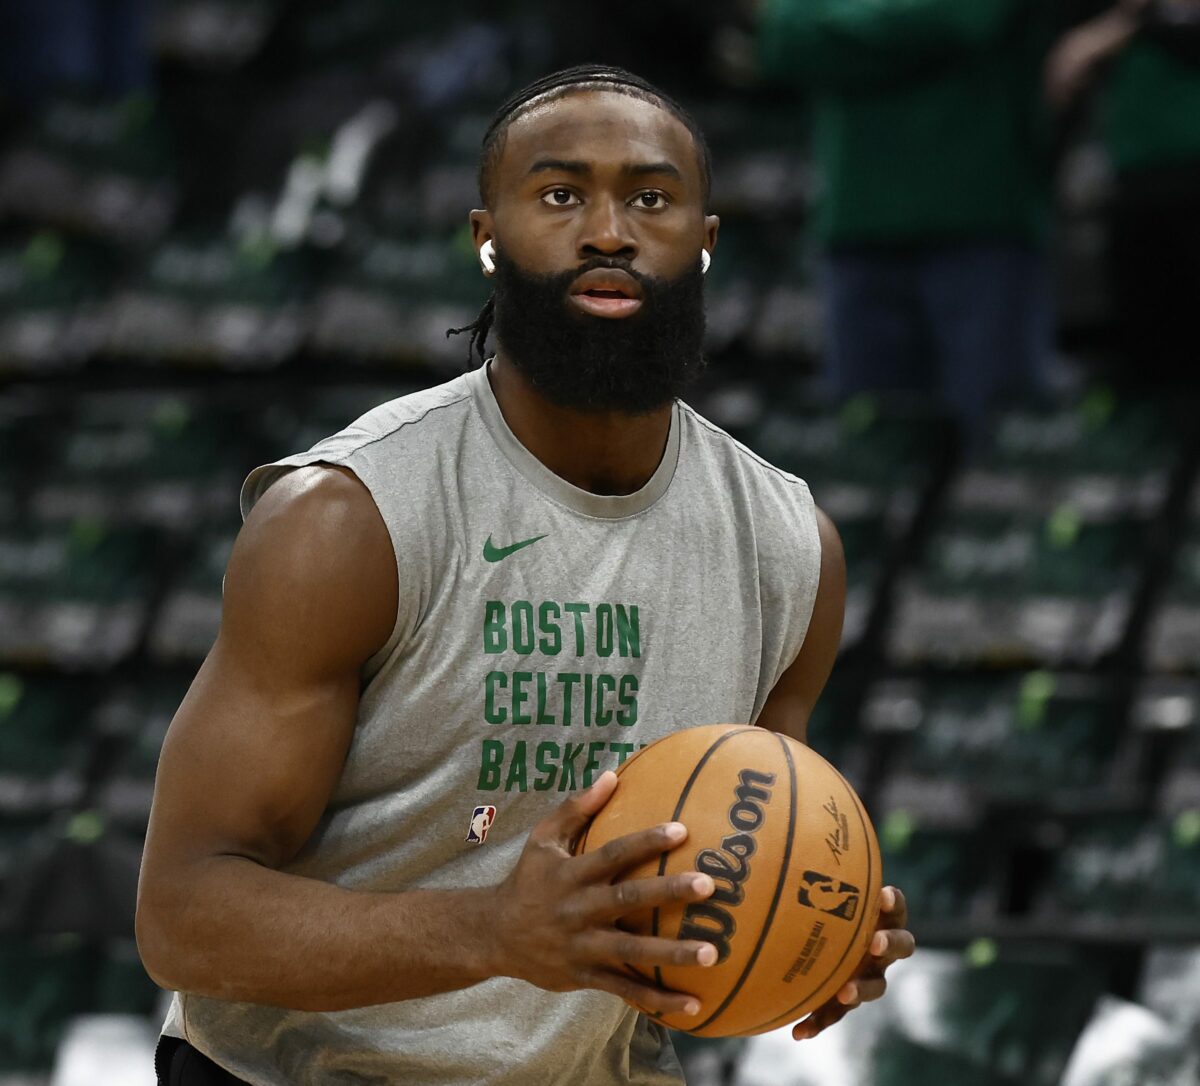 Why has Boston’s Jaylen Brown been playing so well? Per the man himself, ‘it’s my time’